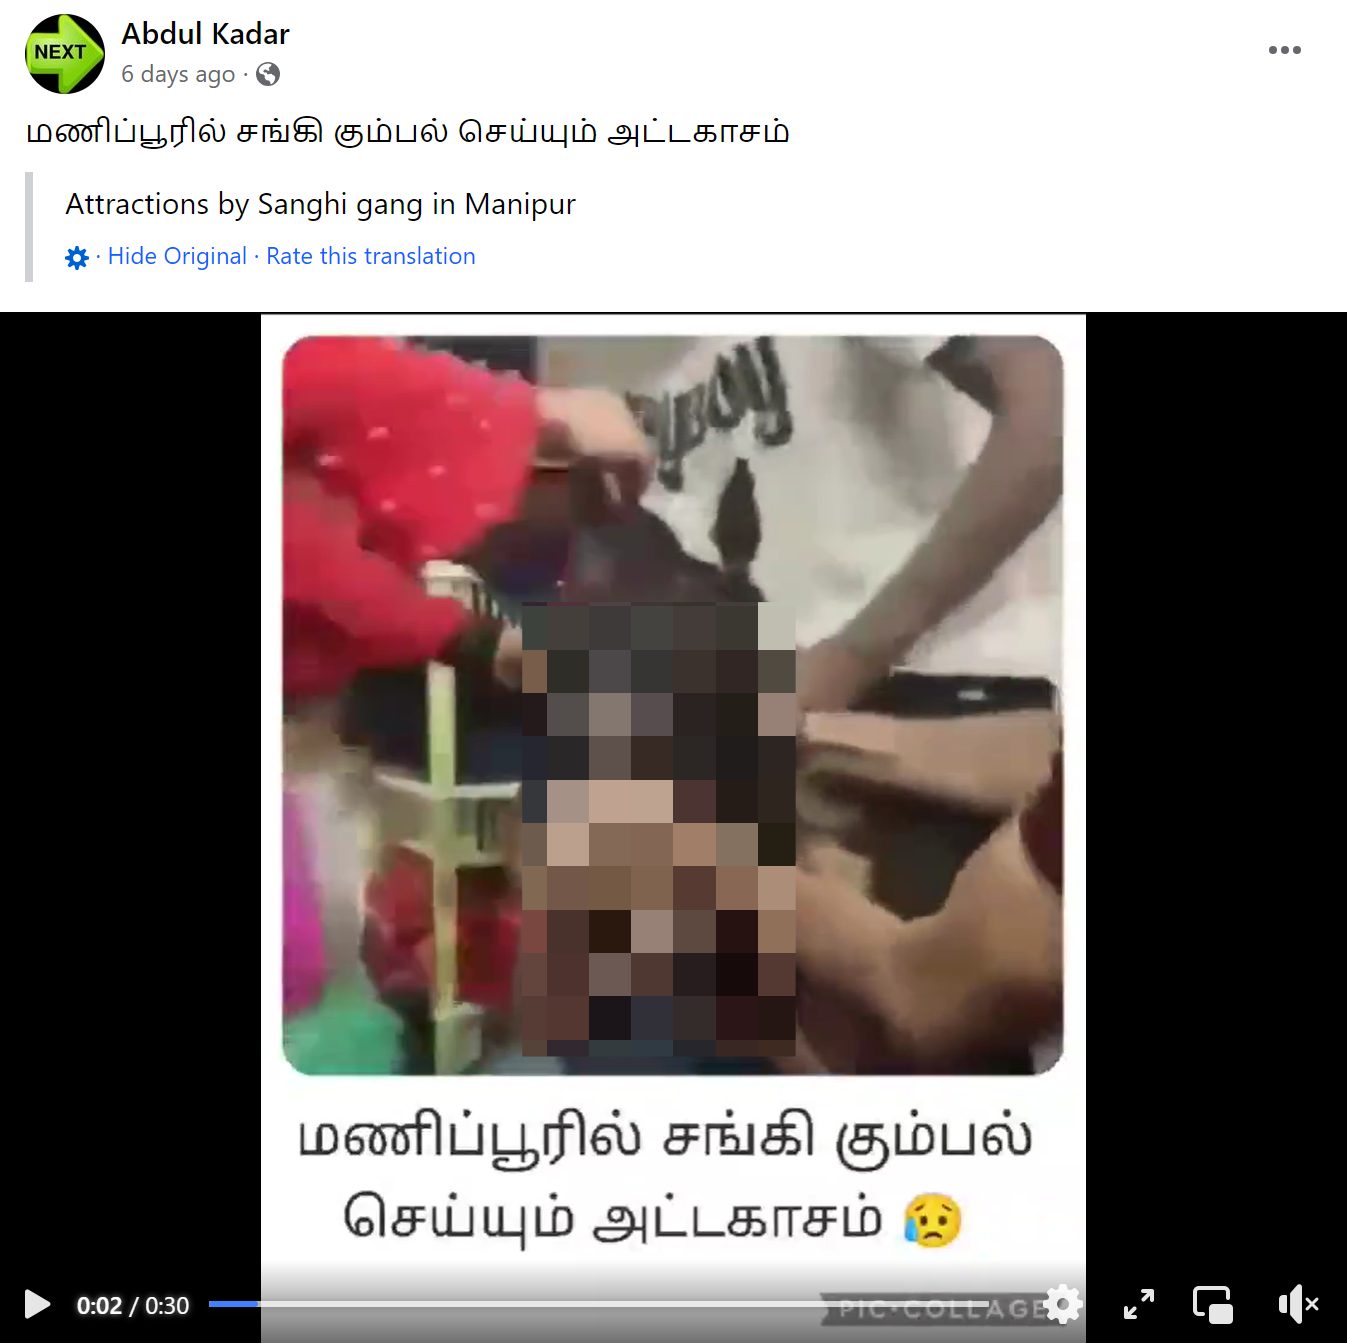 Bangladeshi Real Rape Video - Old video of sexual assault case in Bengaluru involving Bangladeshis viral  as recent incident in Manipur - Alt News